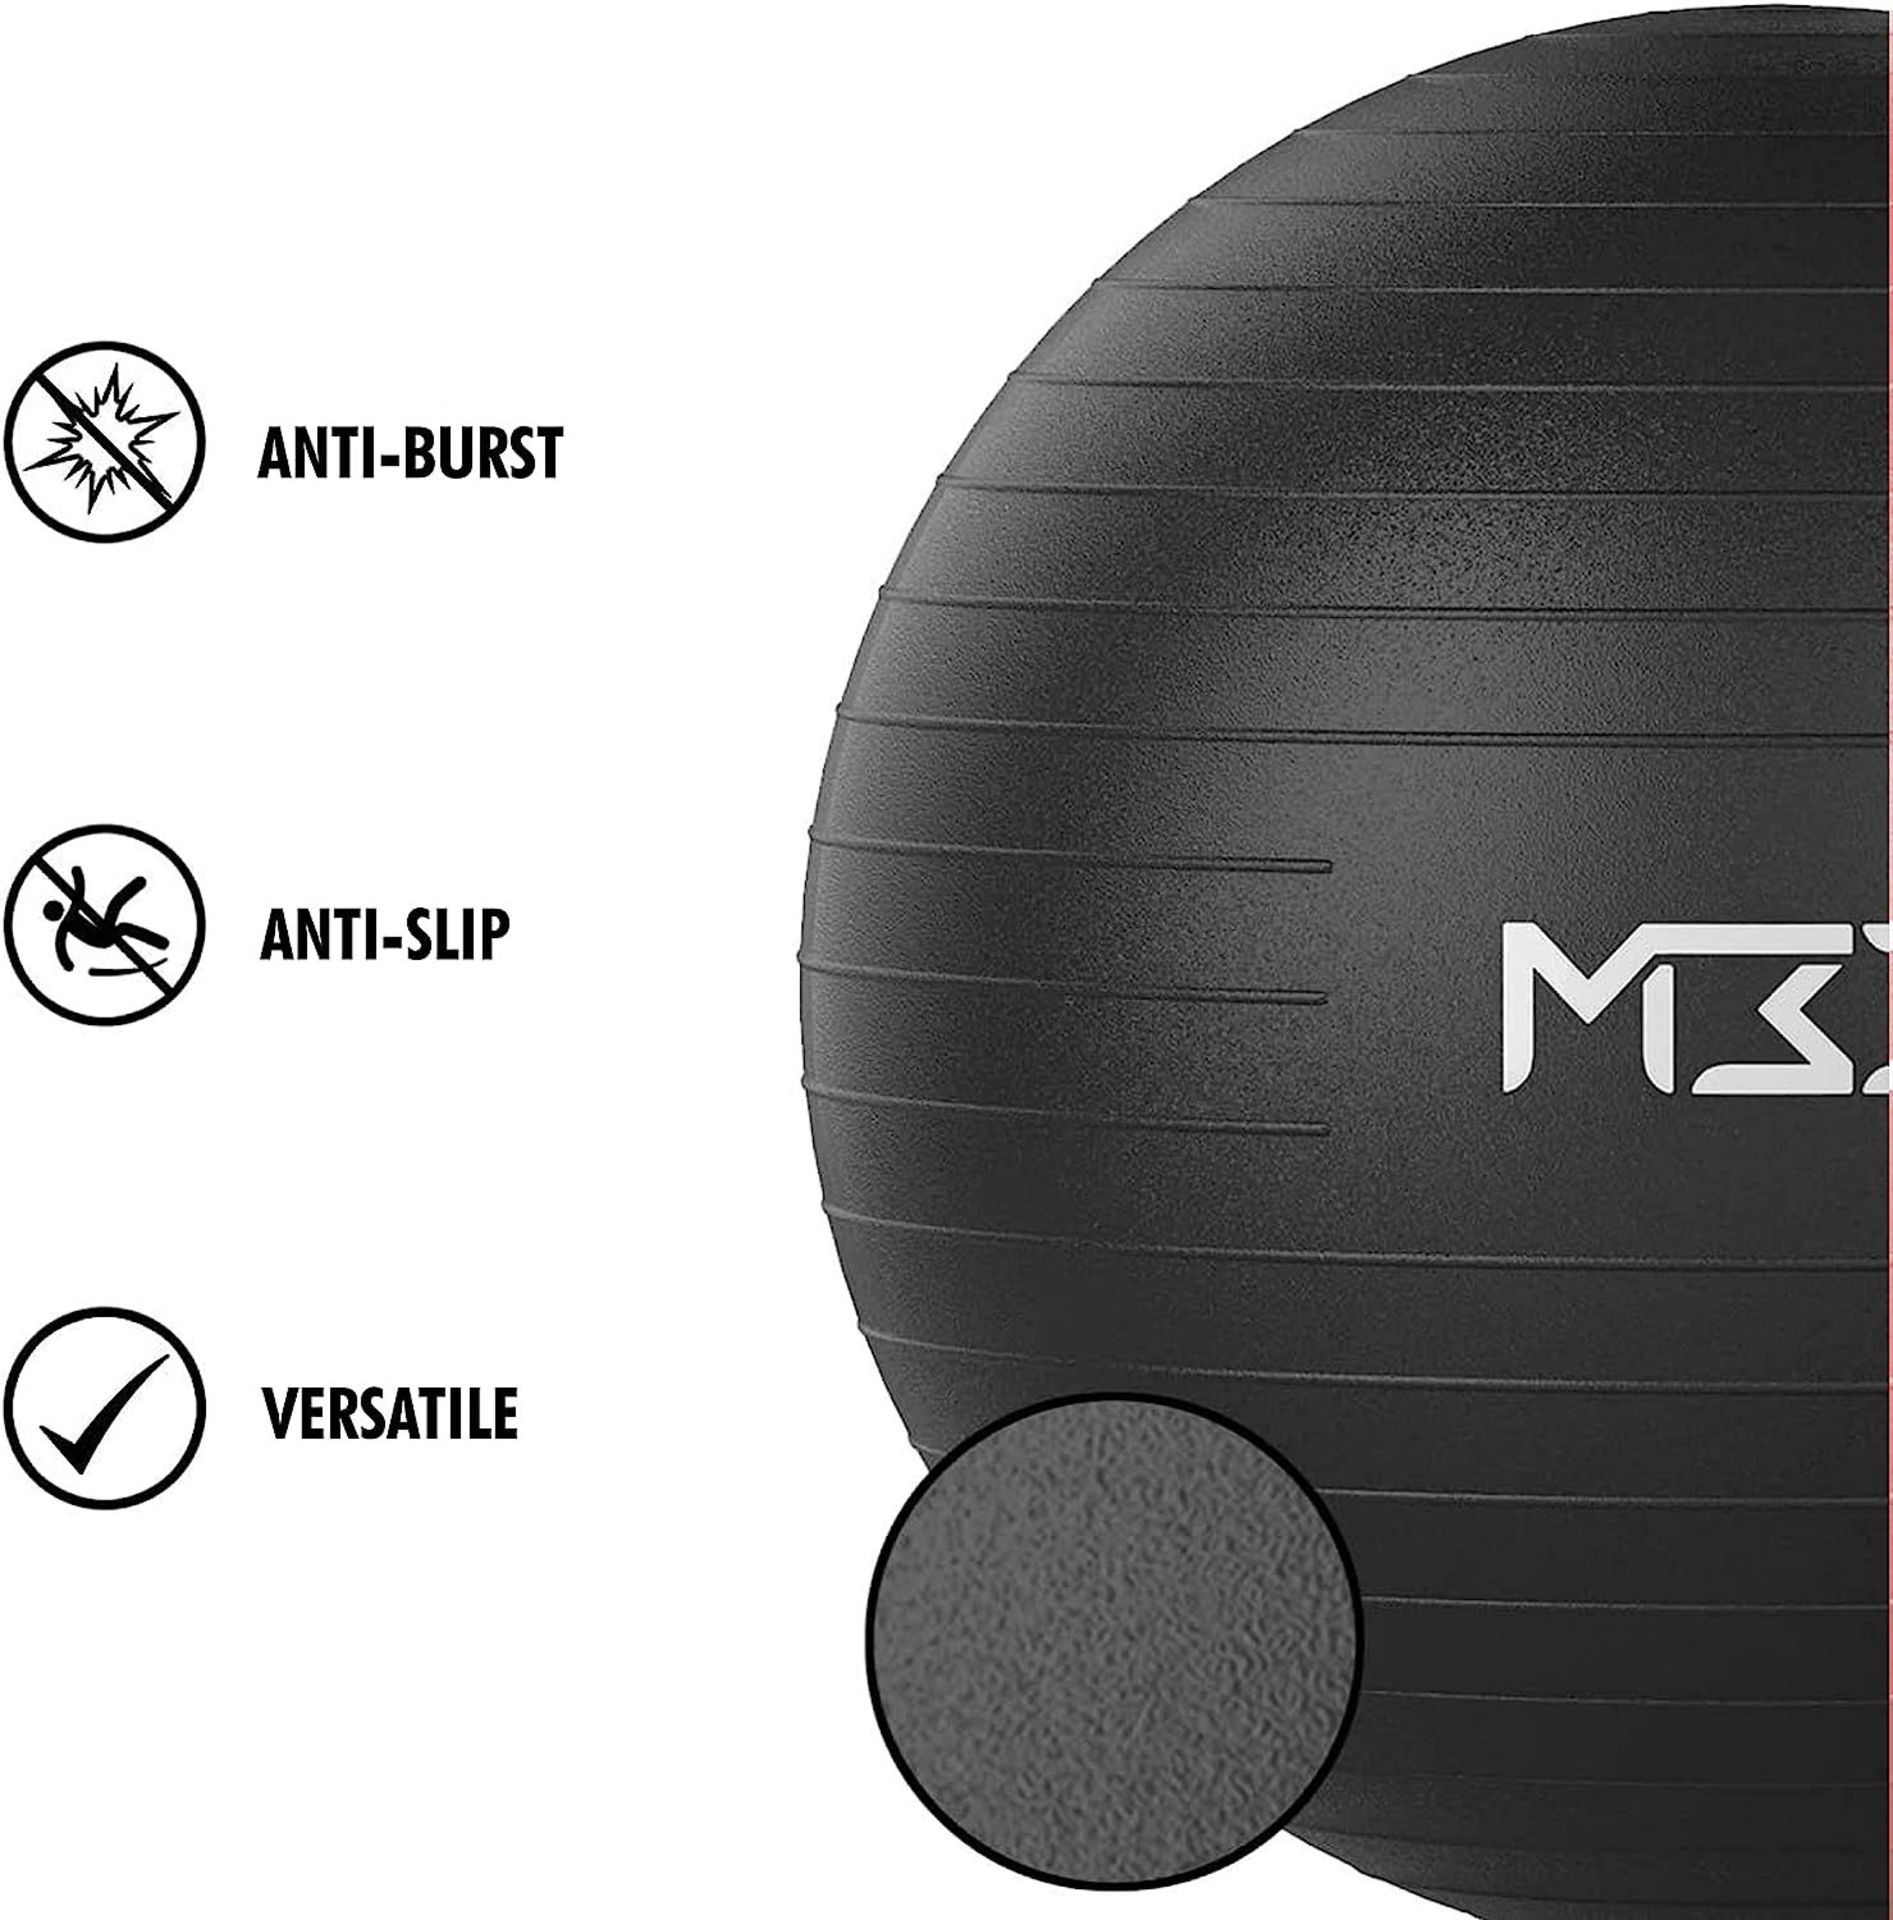 10 x Mode33 Exercise / Yoga / Pregnancy Ball - 55cm (NEW) - RRP £169.90 ! - Image 4 of 11